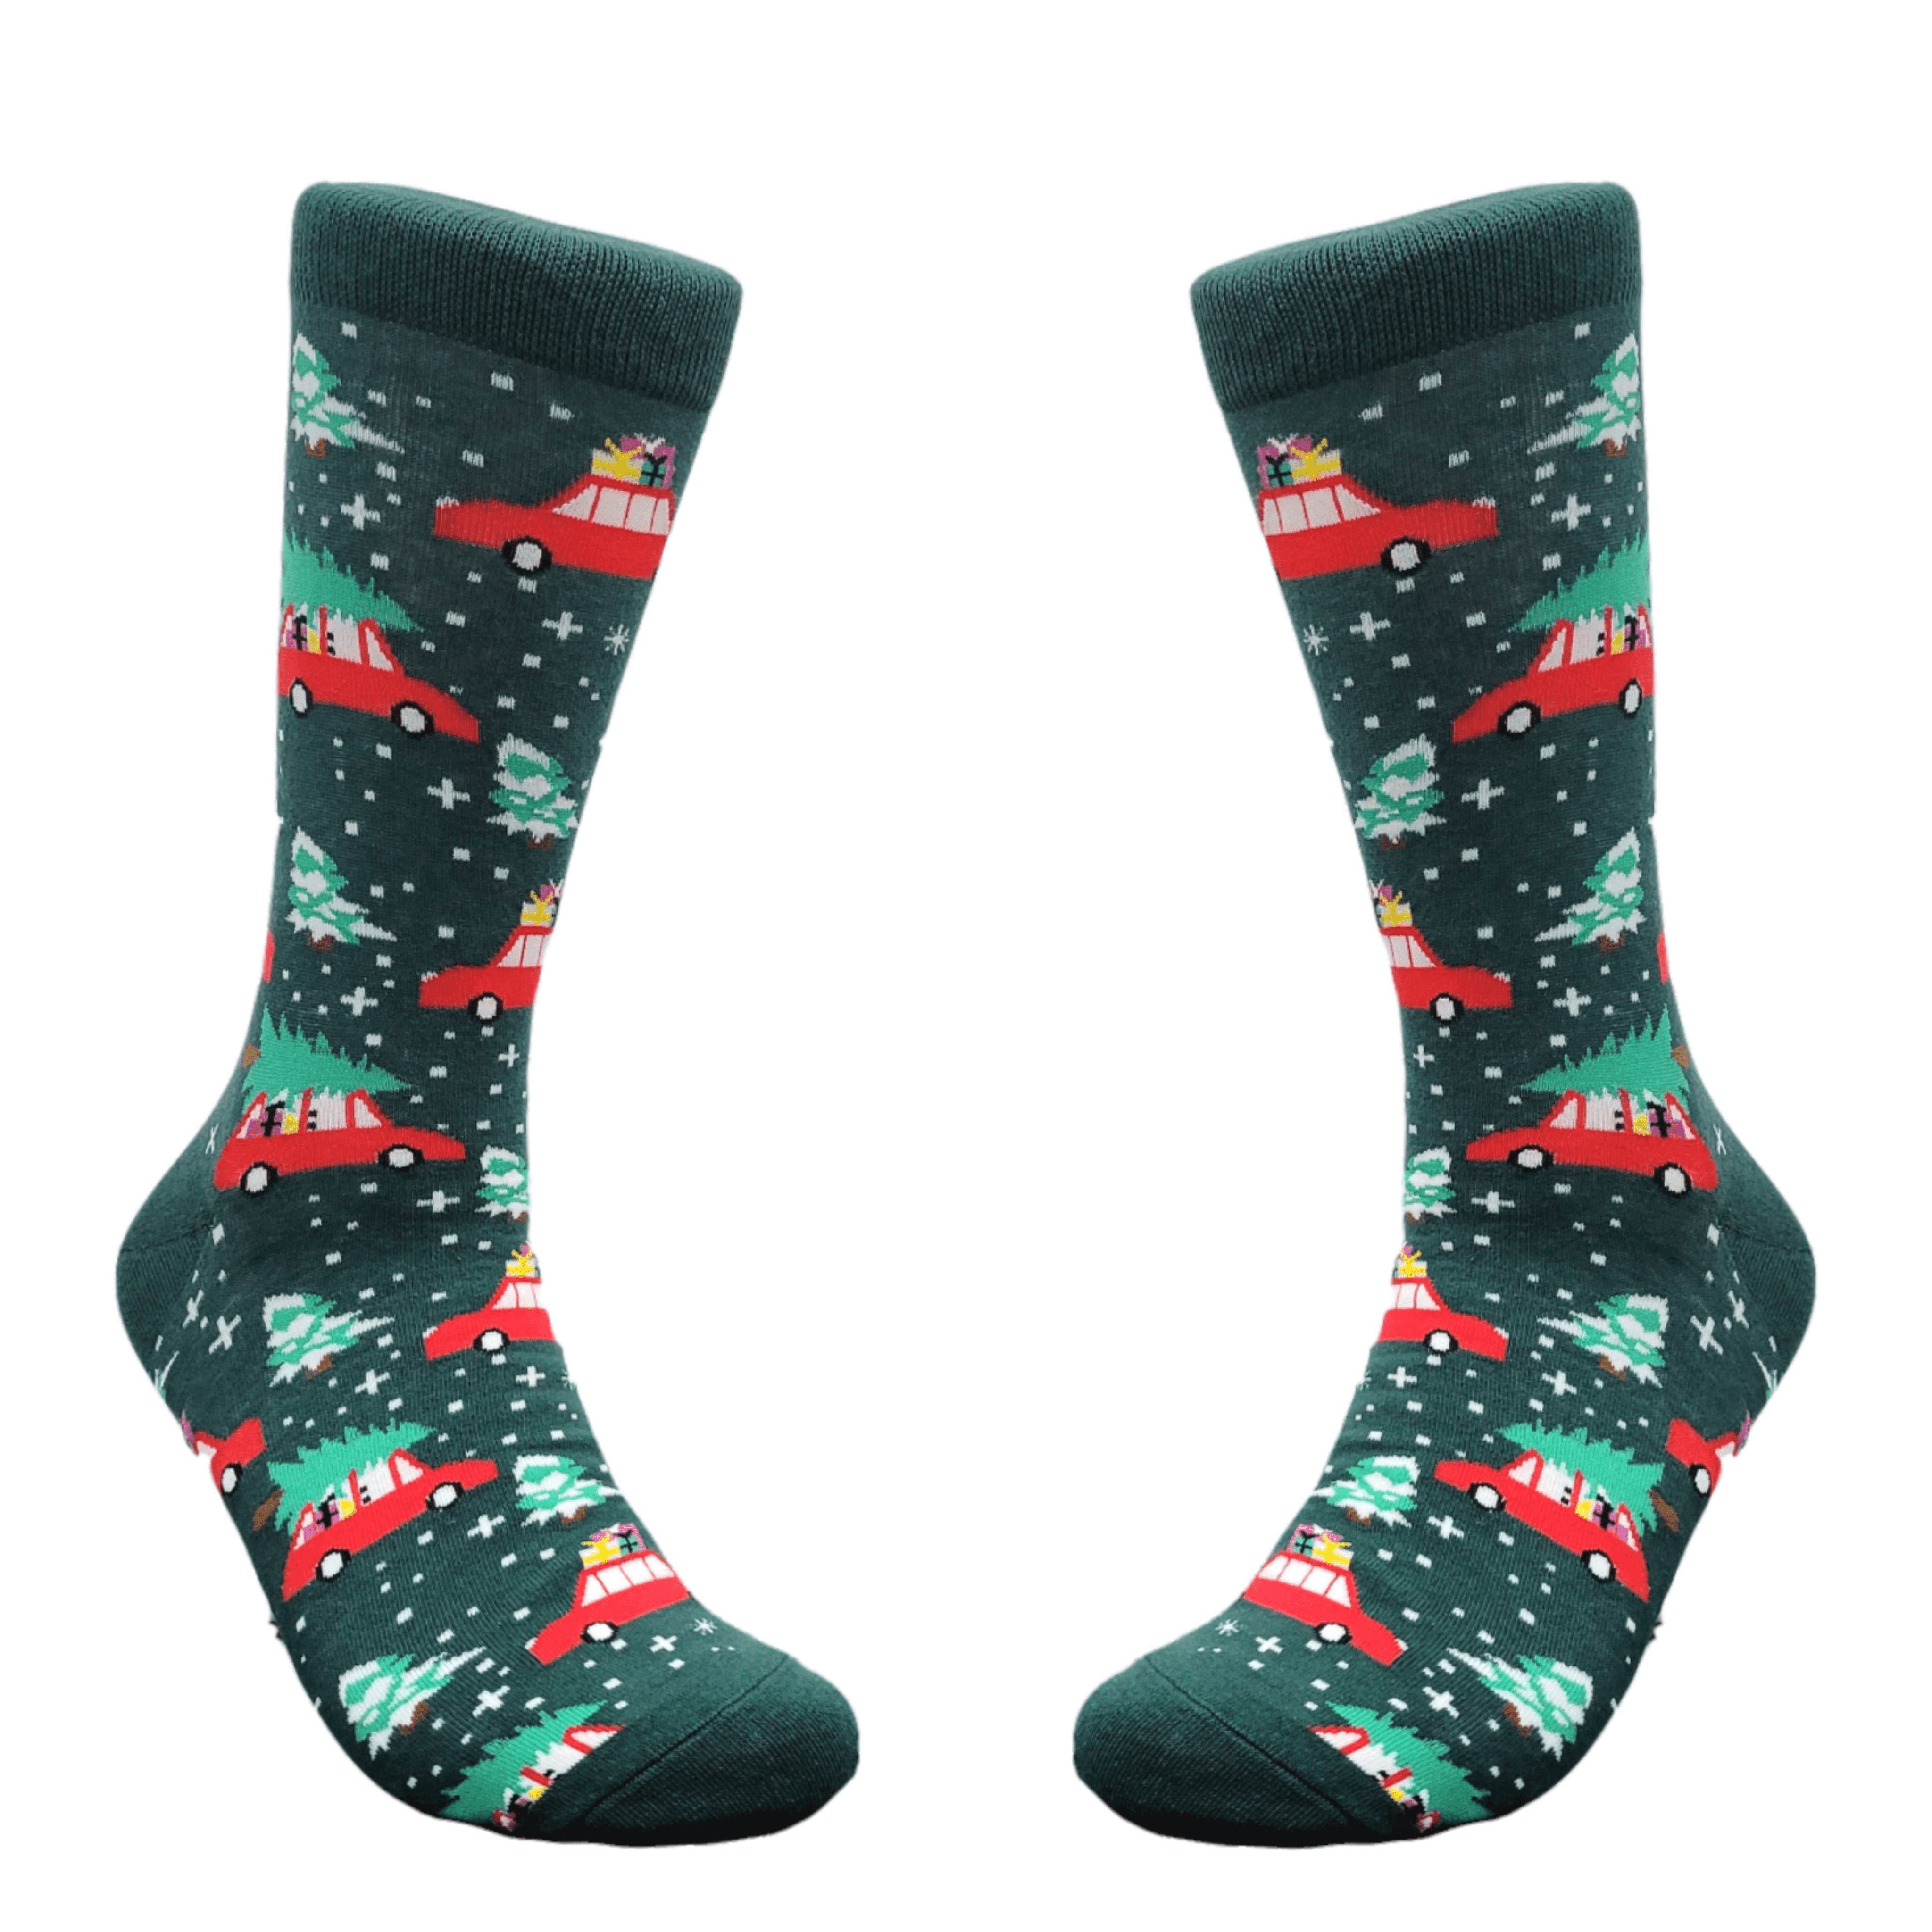 Christmas Tree on a Car Socks from the Sock Panda (Adult Large)